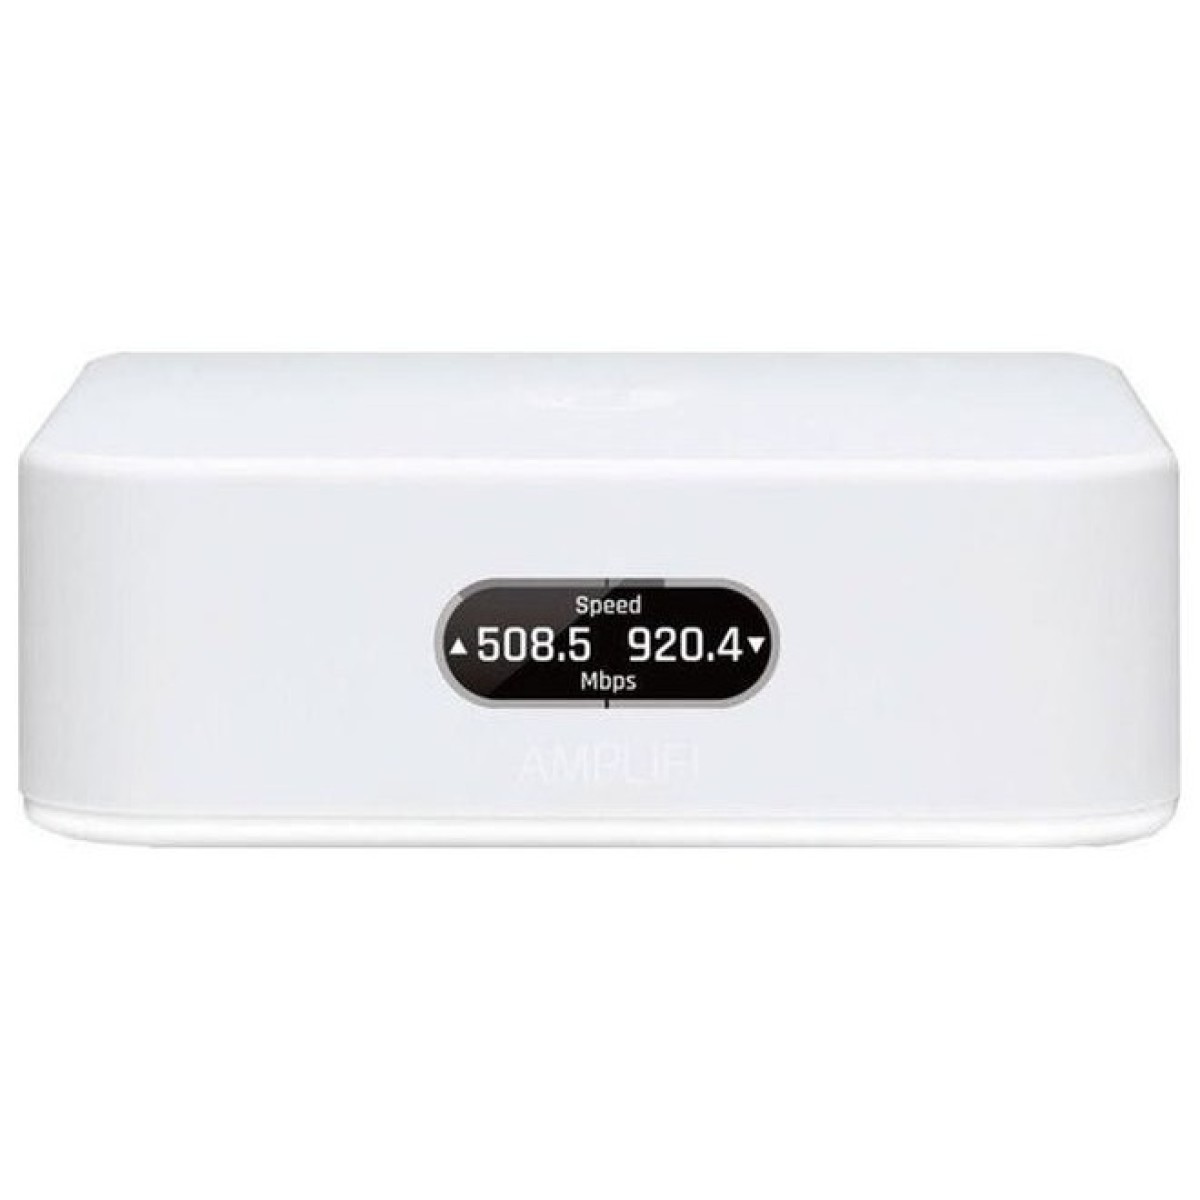 Wi-Fi маршрутизатор Ubiquiti AmpliFi Instant Router (AFi-INS-R) 256_256.jpg